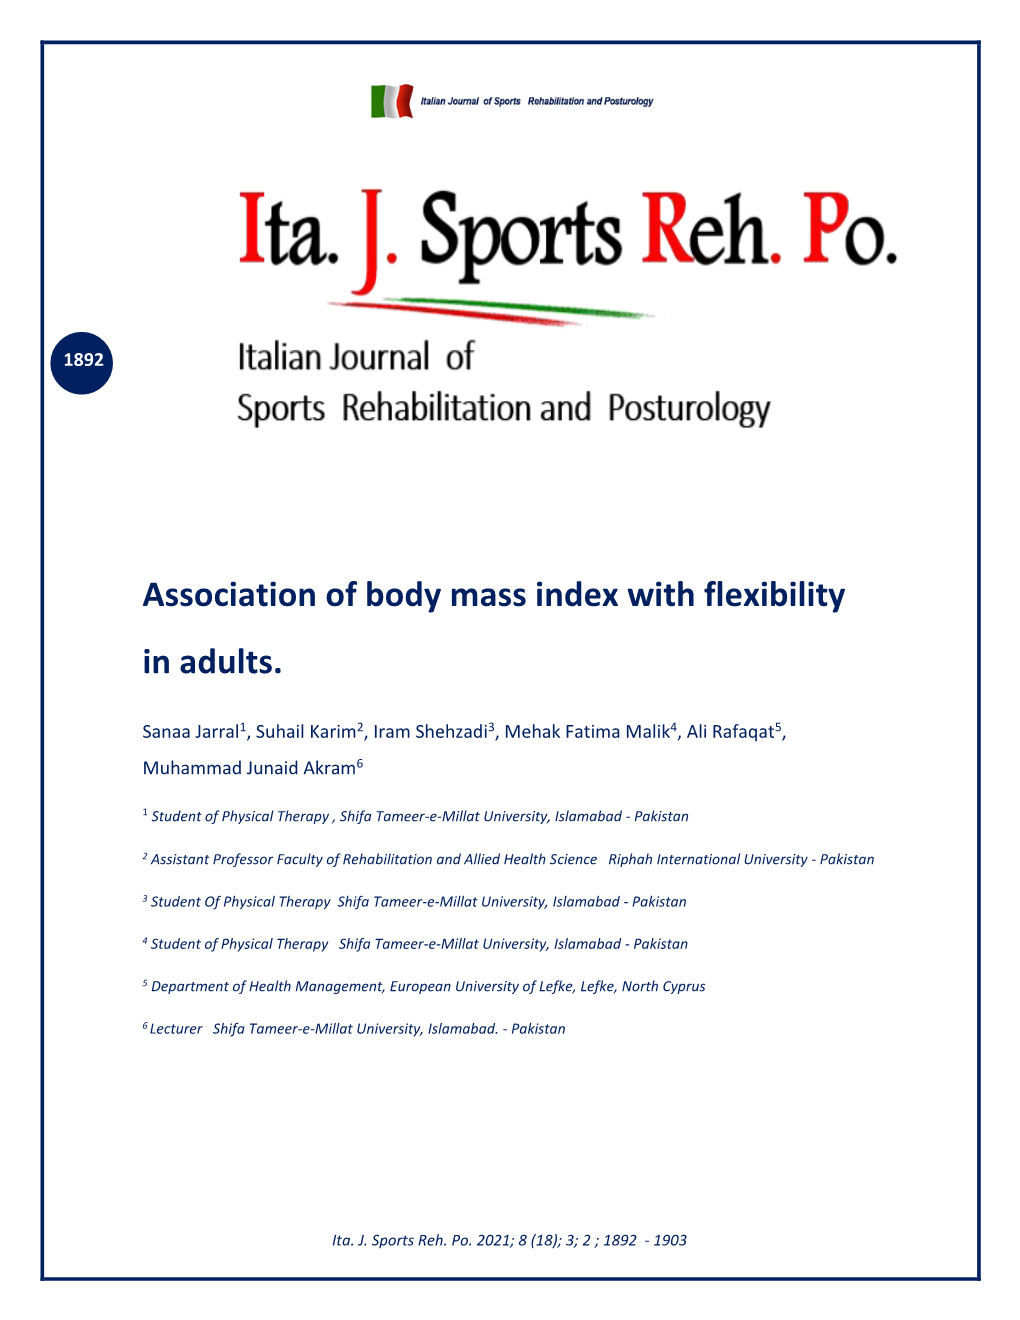 Association of Body Mass Index with Flexibility in Adults